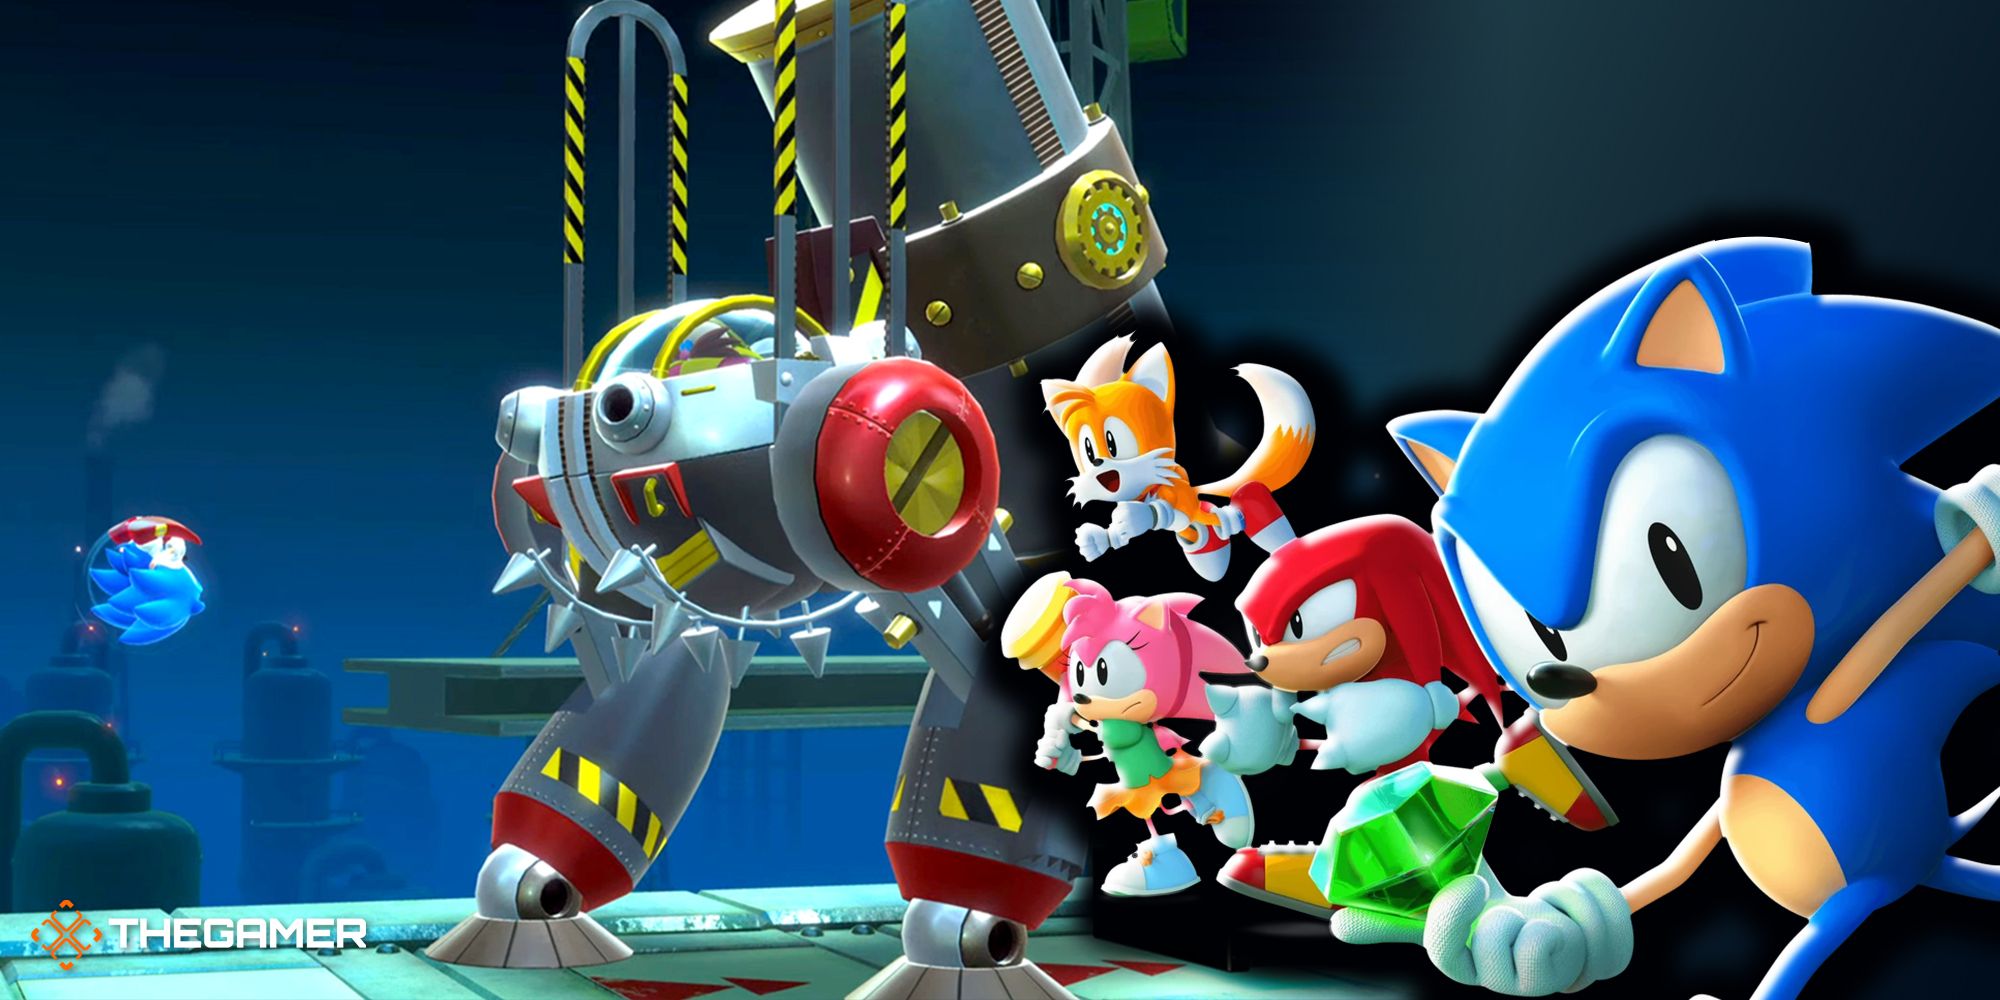 Sonic, Knuckles, Amy, and Tails with an Eggman boss robot in the background.